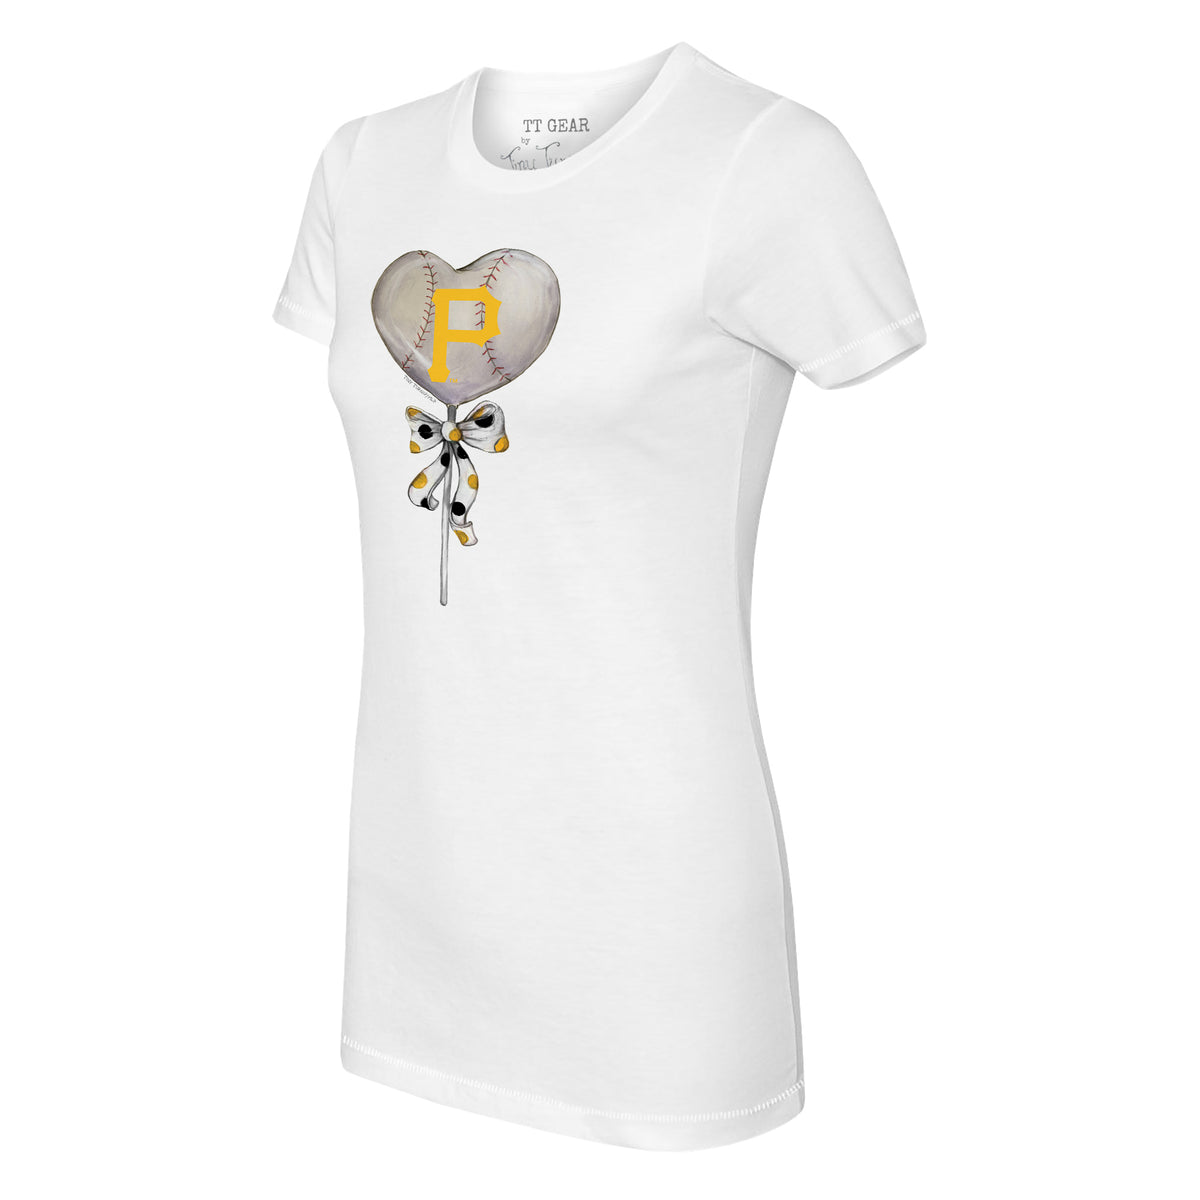 Pittsburgh Pirates Heart Lolly Tee Shirt